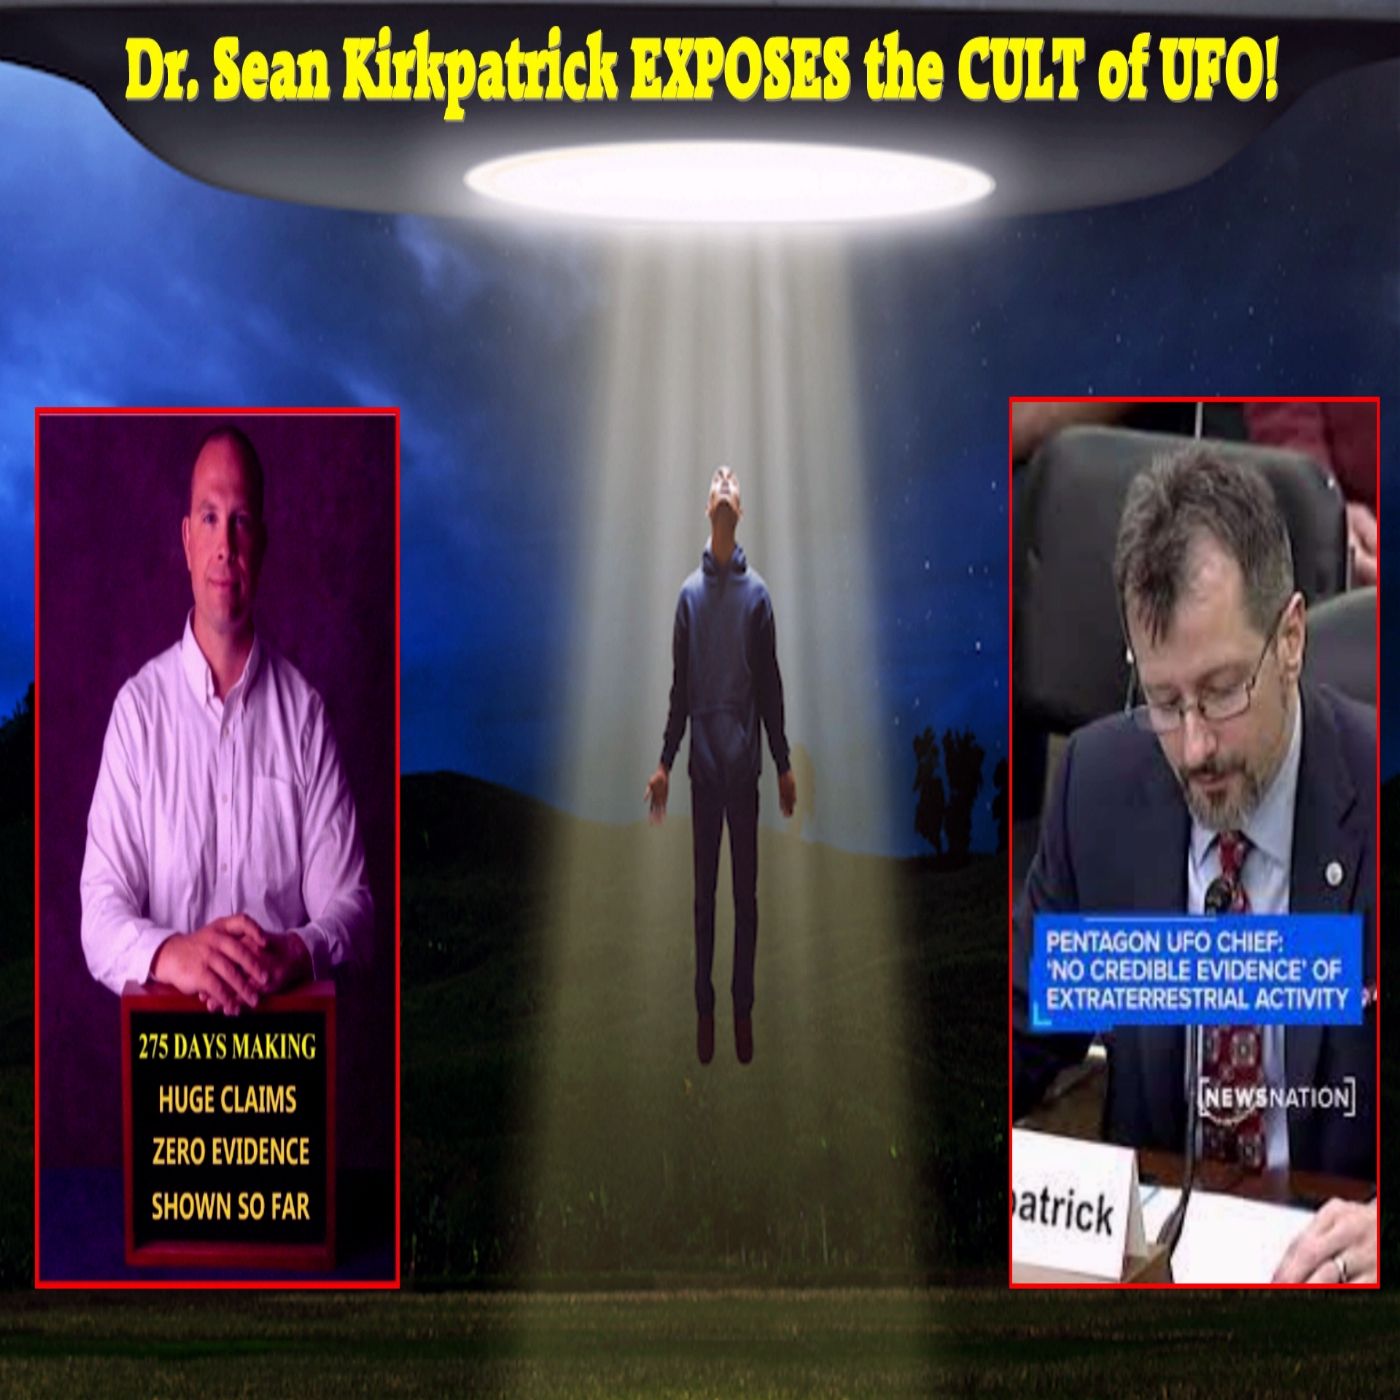 Dr. Sean Kirkpatrick EXPOSES the CULT of UFO! Grusch, Ross Coulthart, Corbell have no evidence!